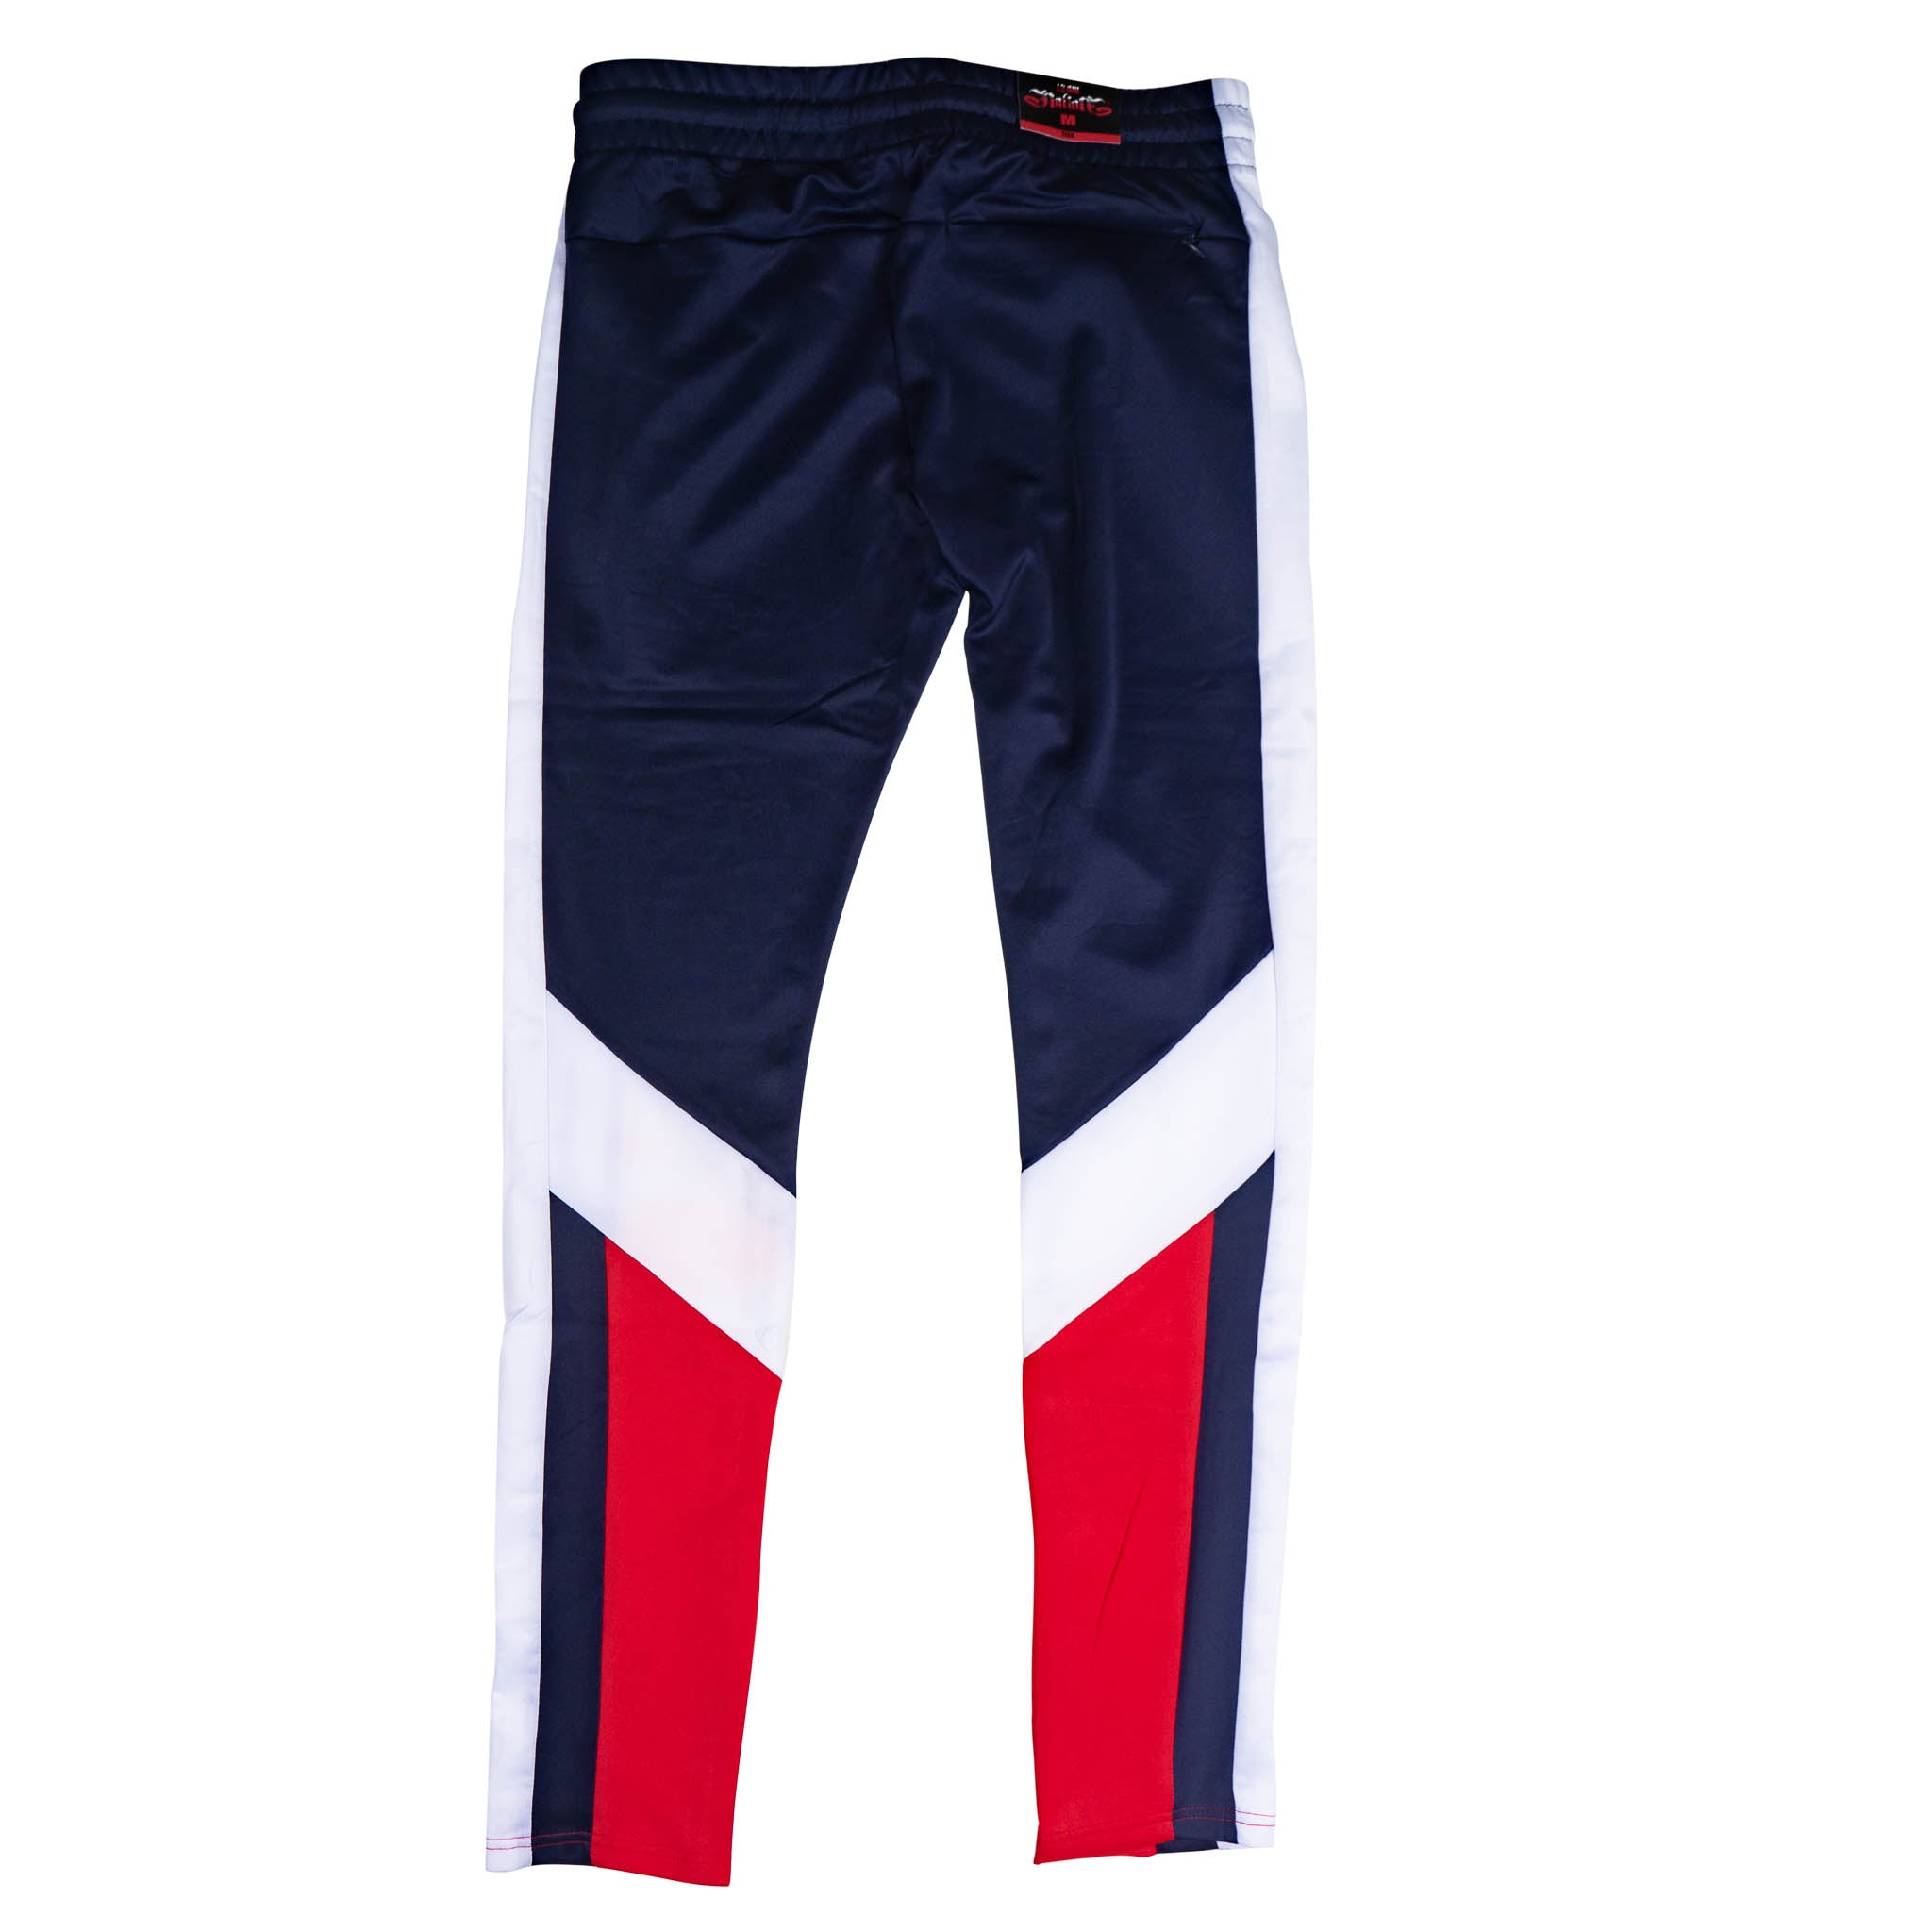 12 AM NATION COLOR BLOCK TRACK PANTS NAVY/WHITE/RED - 89213